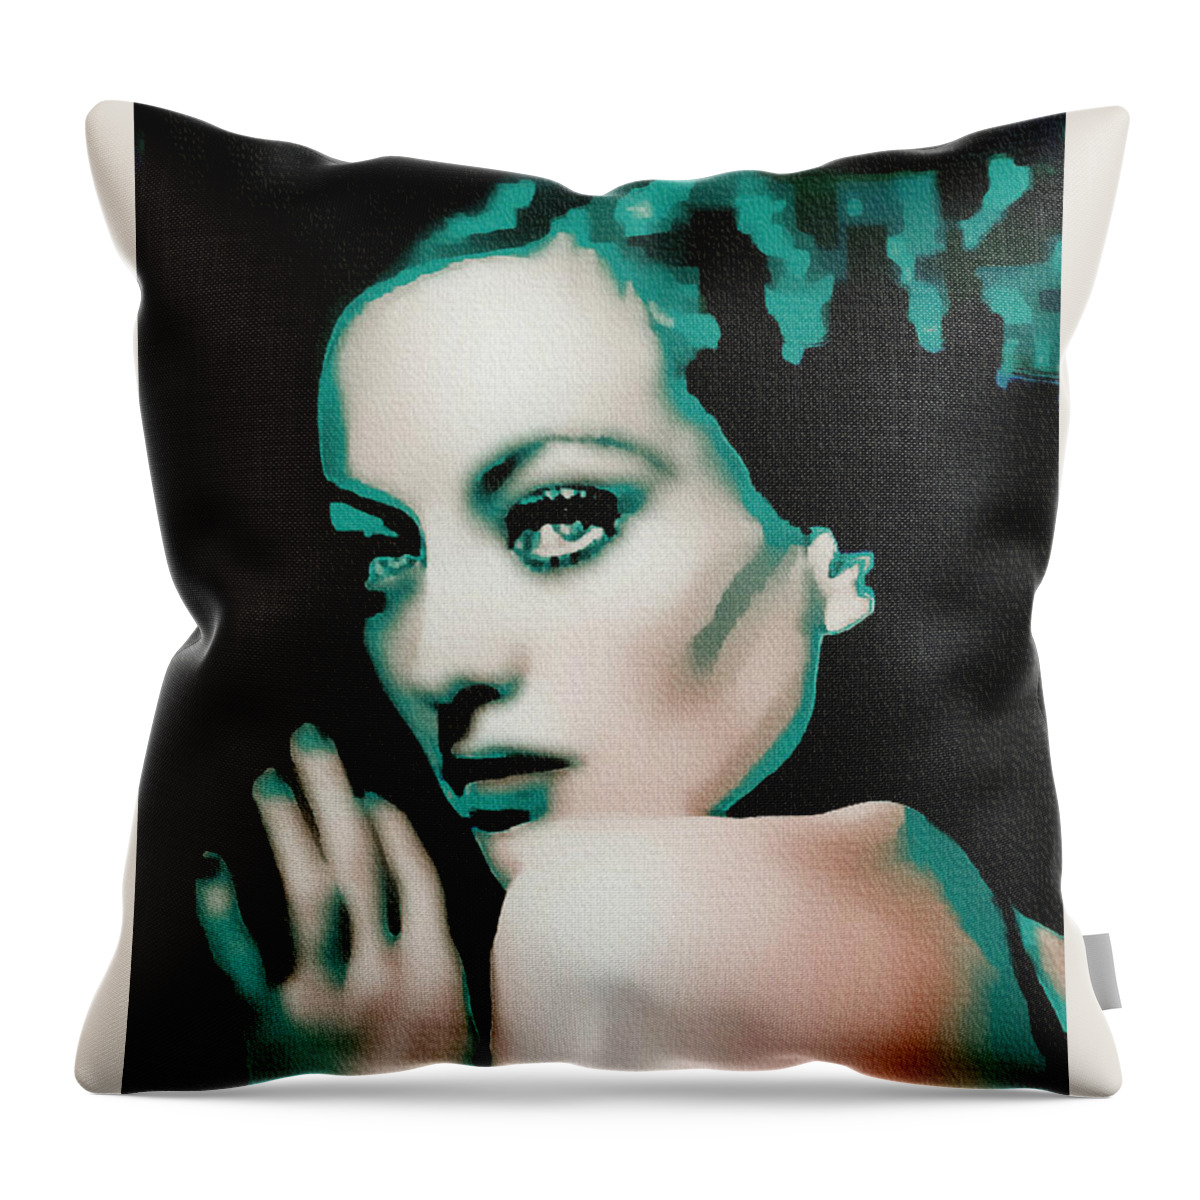 Joan Crawford Throw Pillow featuring the painting Joan crawford - Pop Art by Ian Gledhill